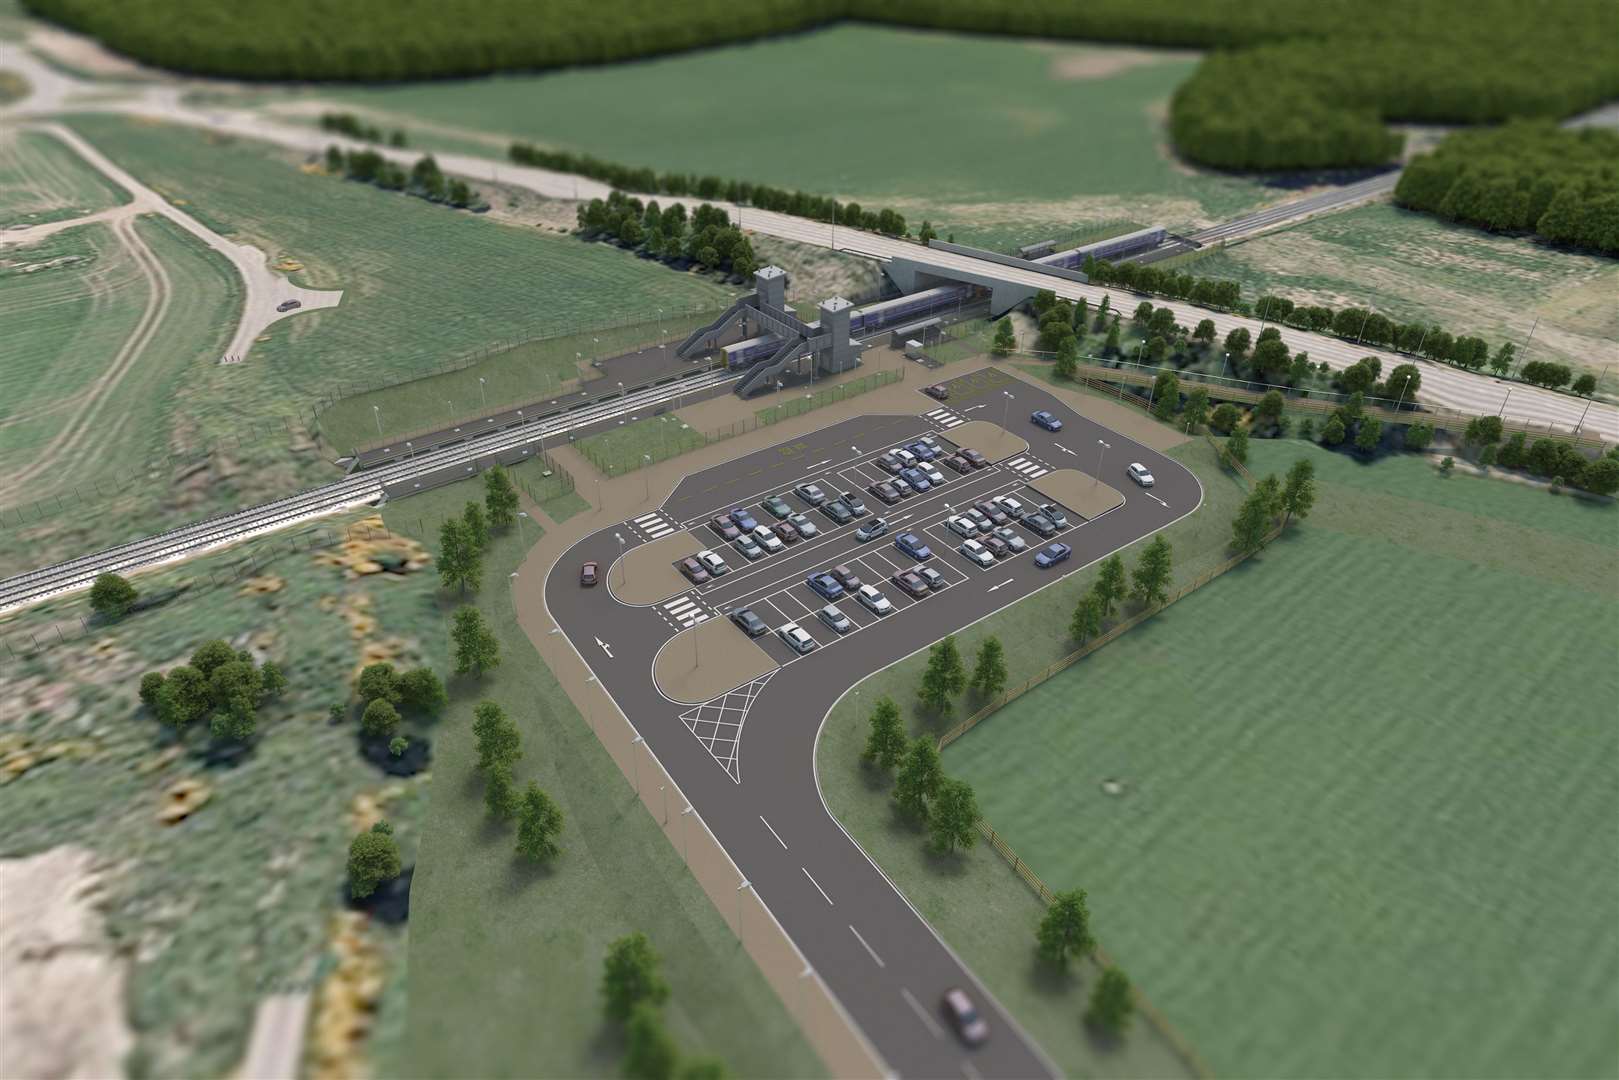 An artist's impression of the planned new railway station at Dalcross, next to Inverness Airport.